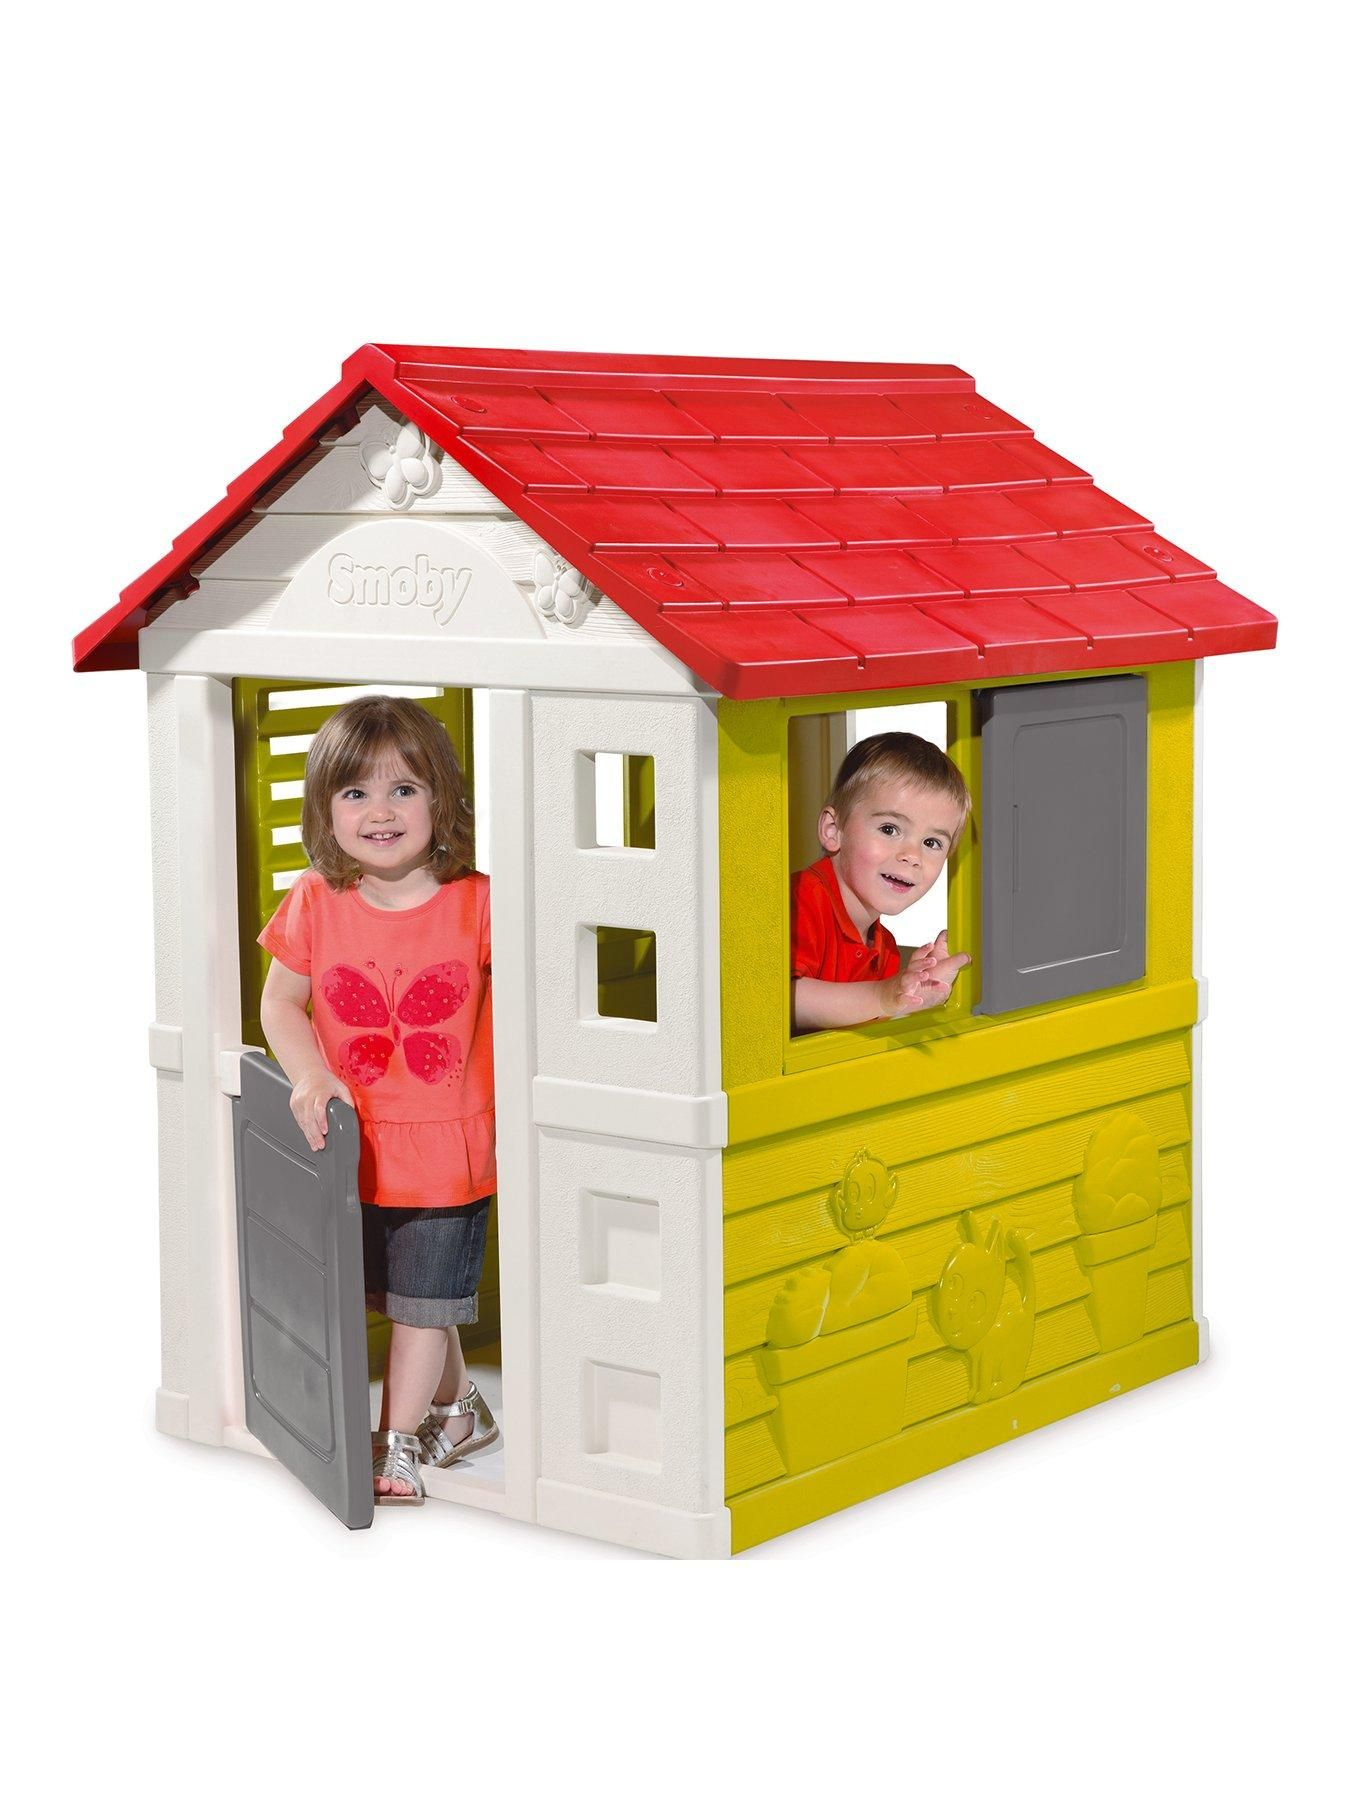 Smoby Nature Home In One Colour | Products In 2019 | Play ... tout Maison De Jardin Smoby